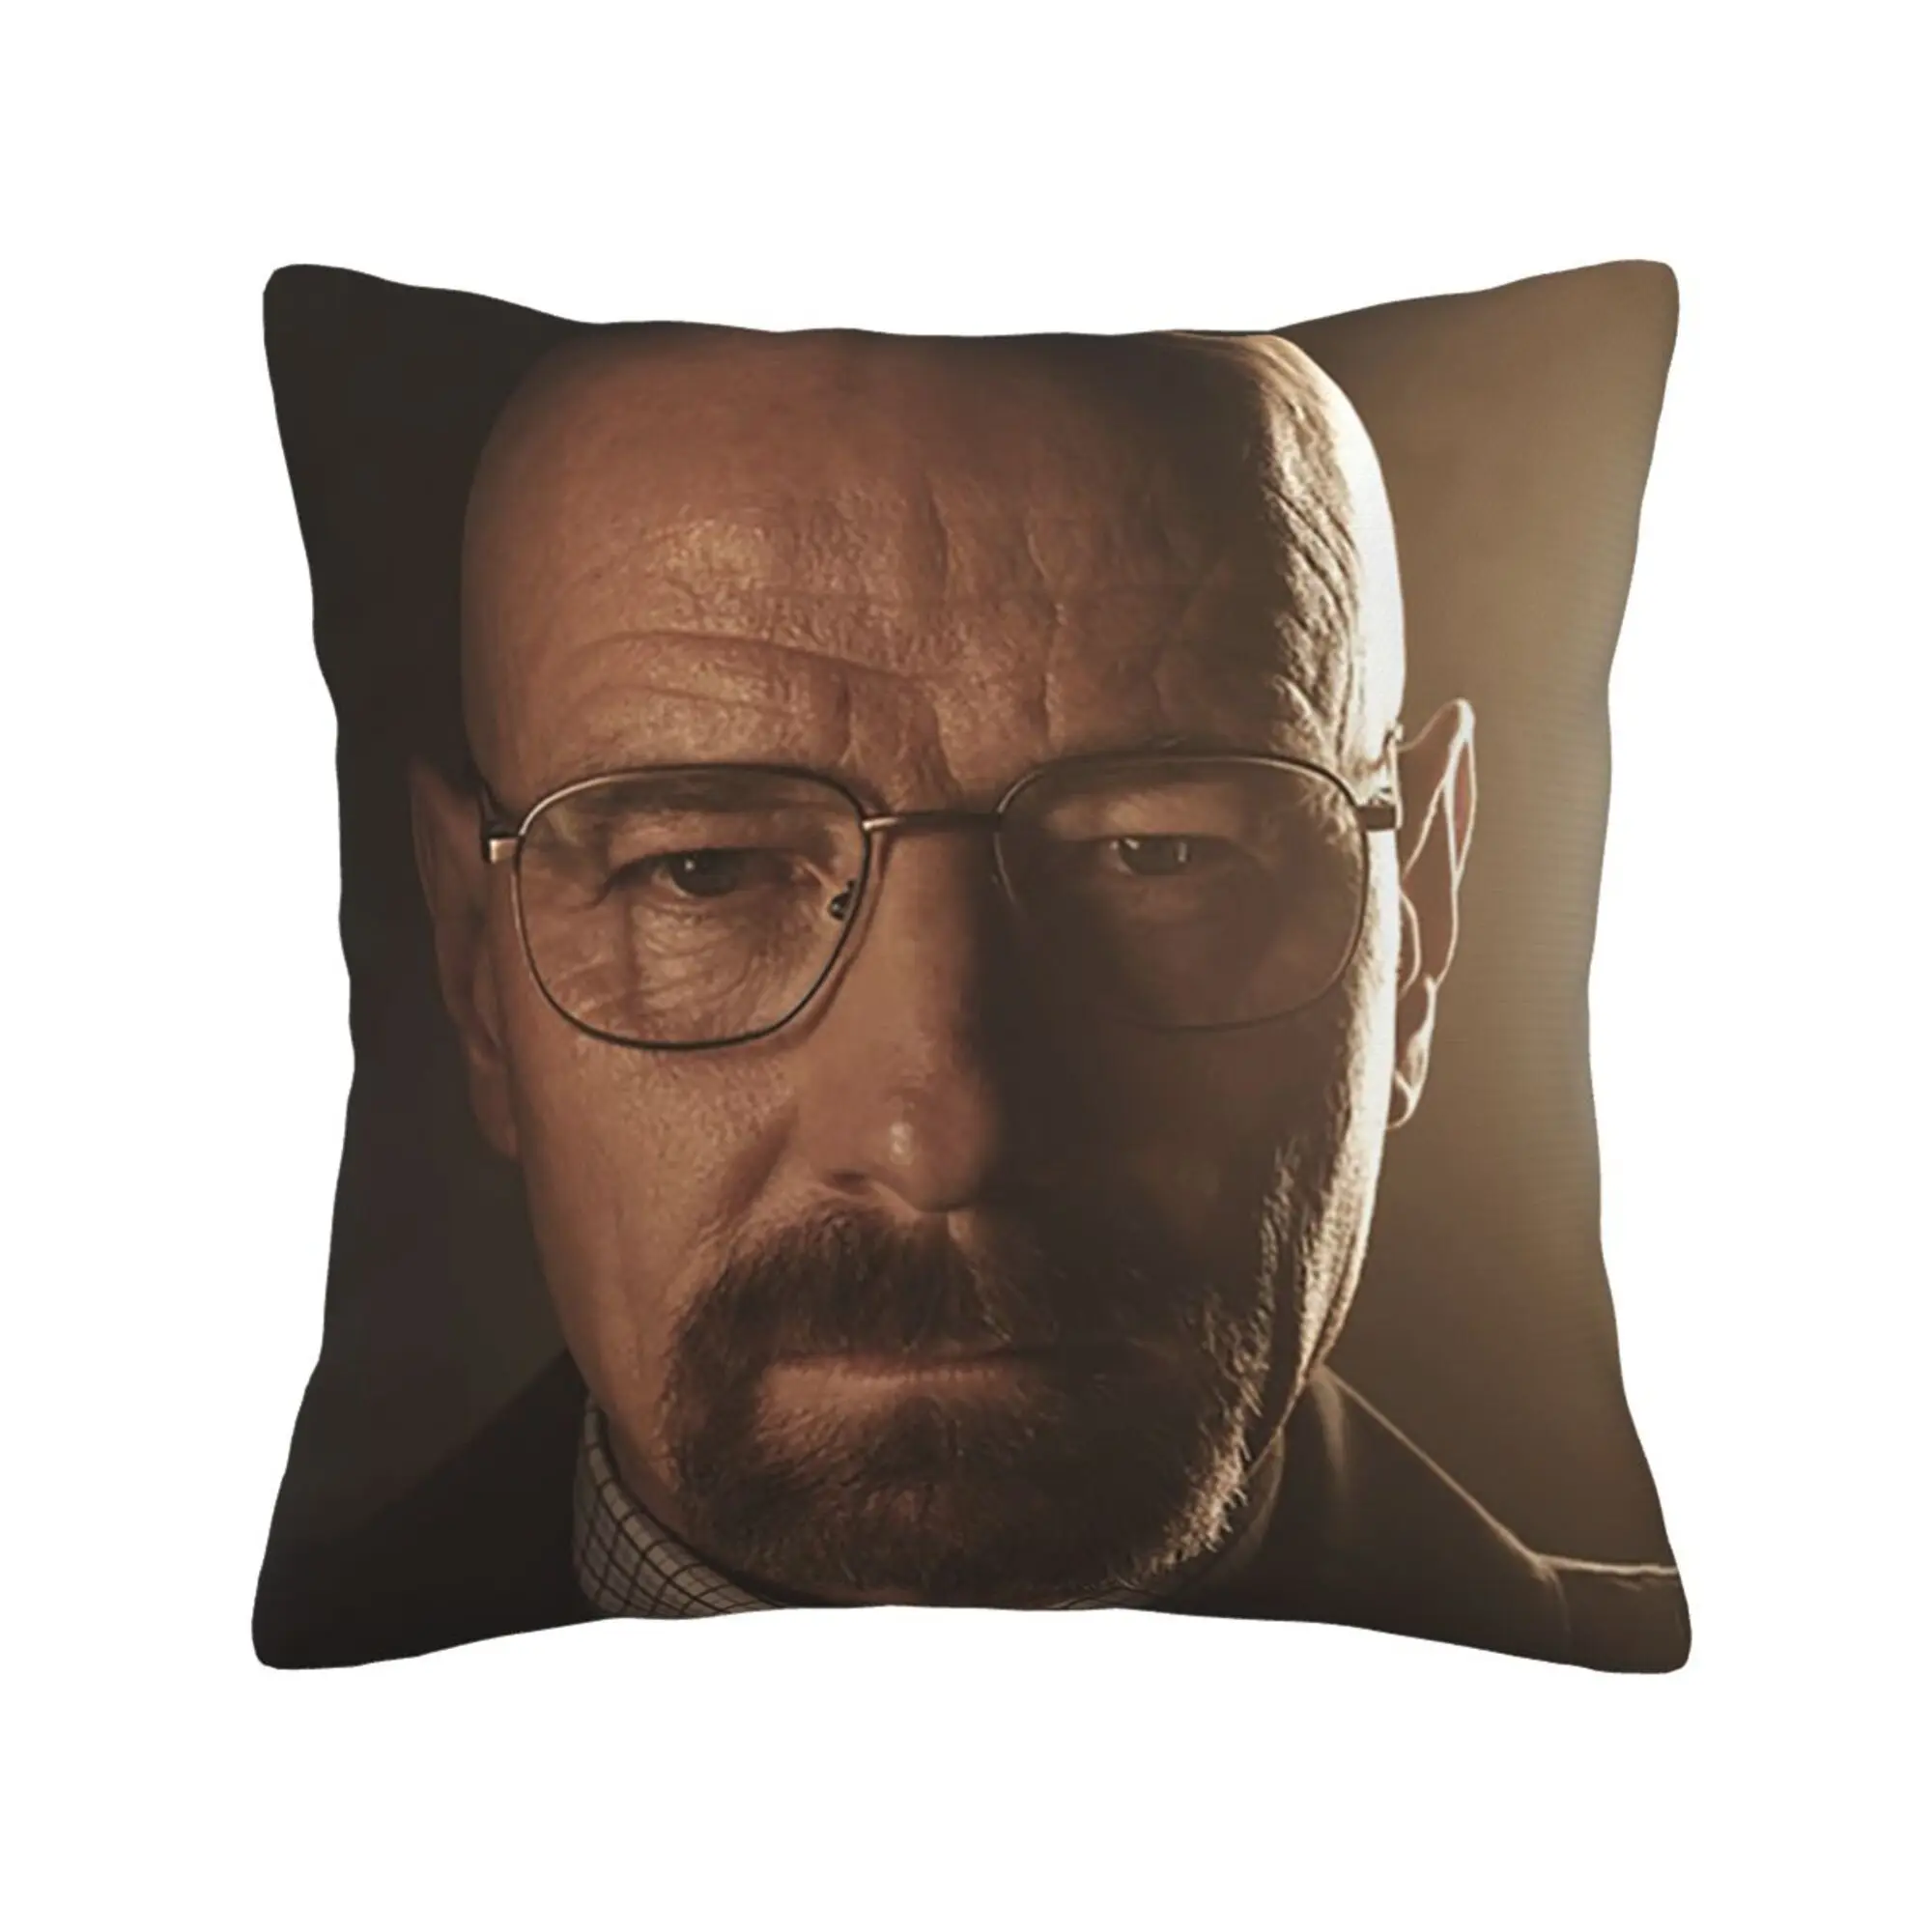 Walter White Meme Pillow Case Home Decoration 100% Polyester Funny Cushion Cover for Sofa Square Pillow Cover 18x18inch